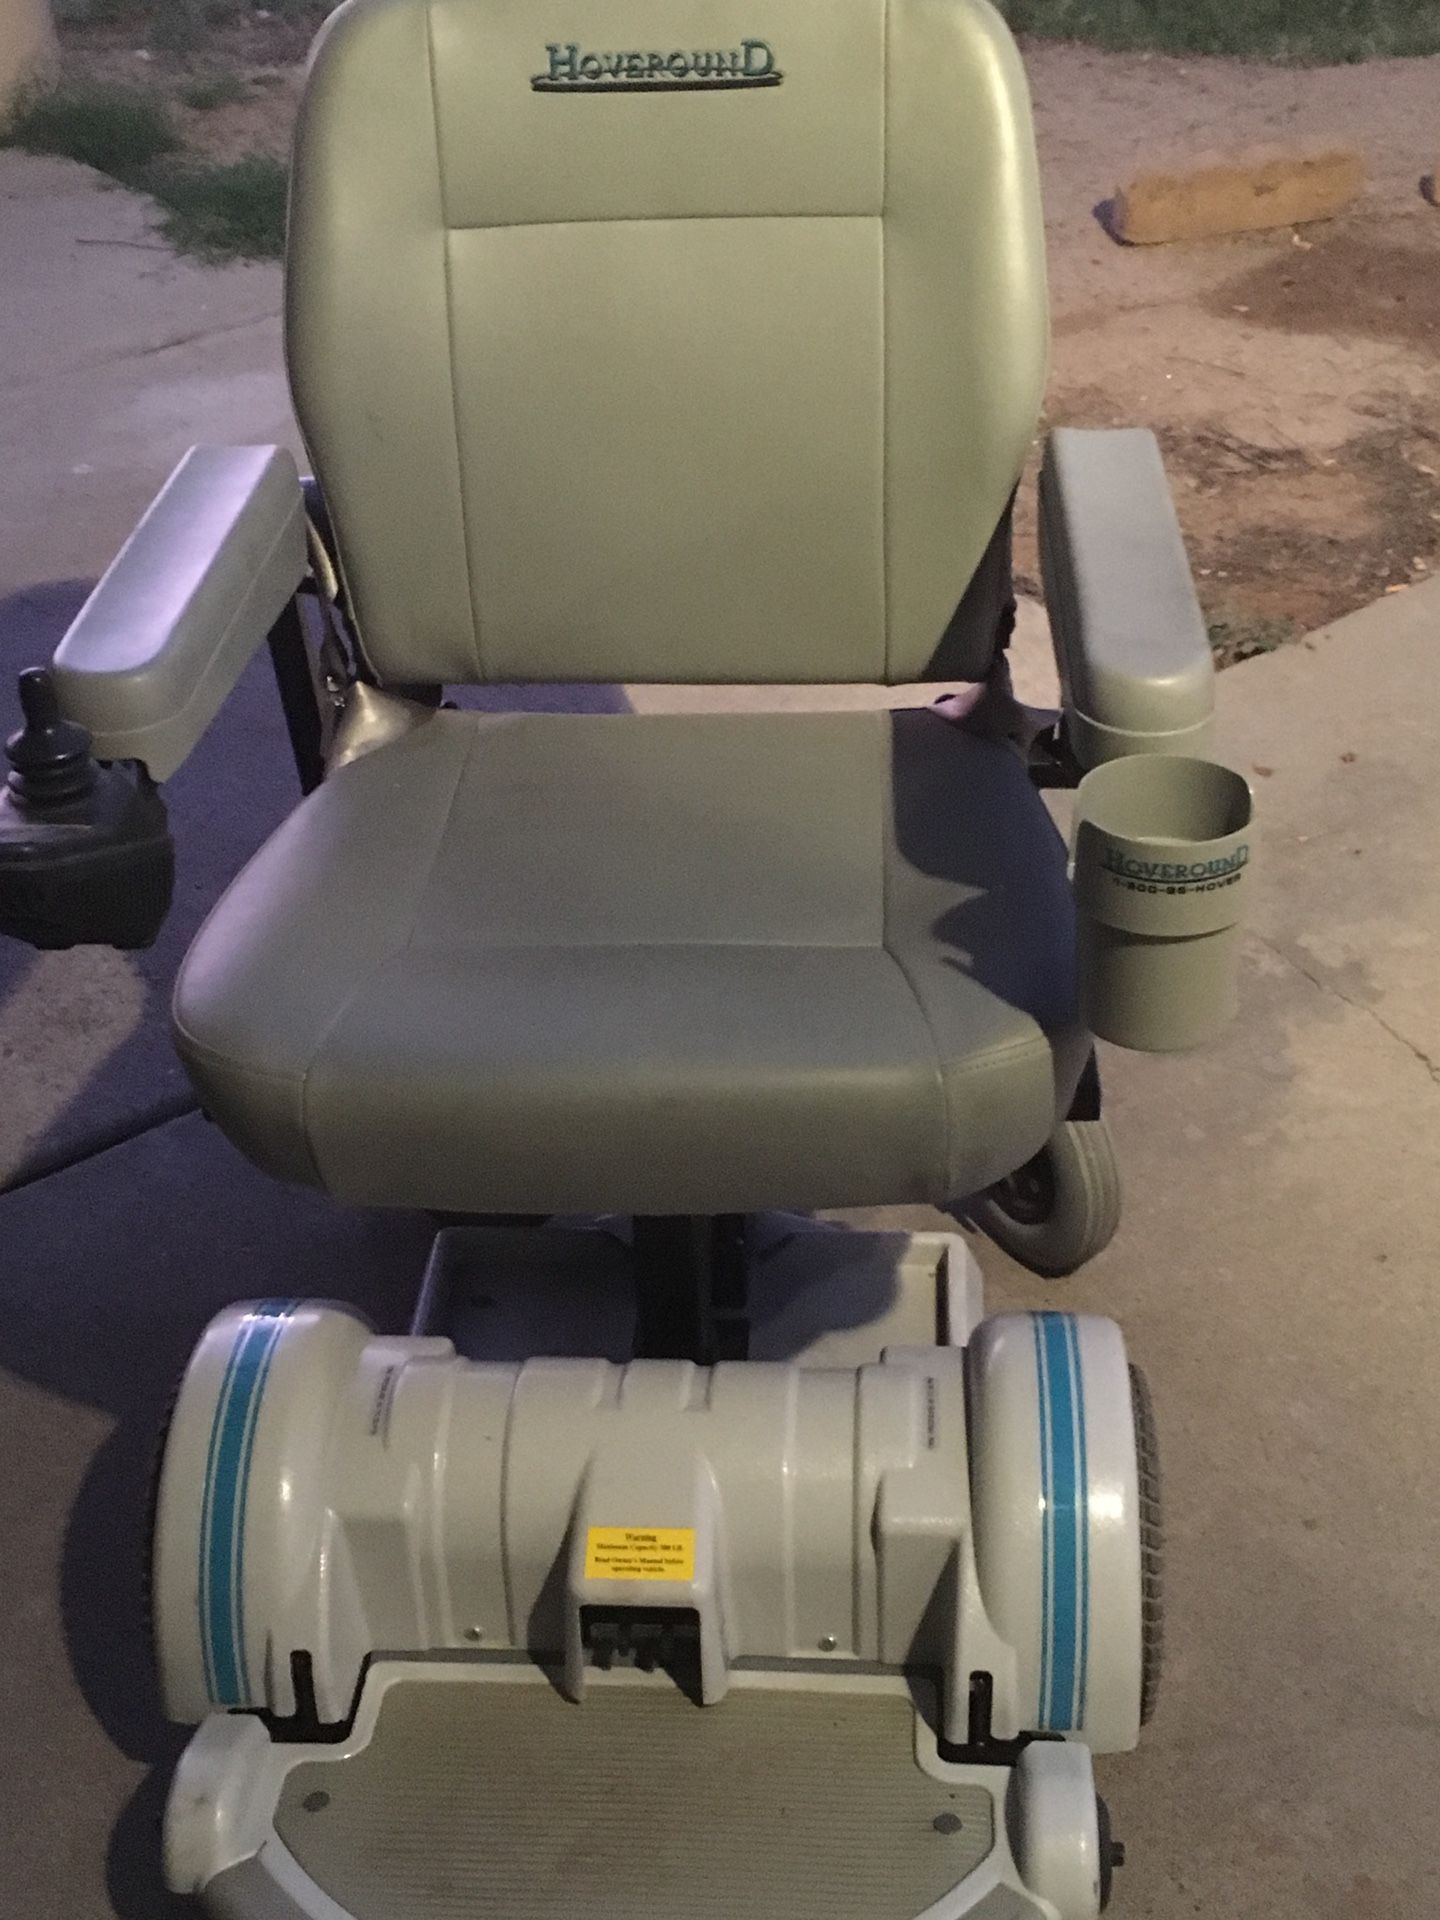 Hoveround MPV 5 Mobility, Power wheelchair, Chair Complete with accessories